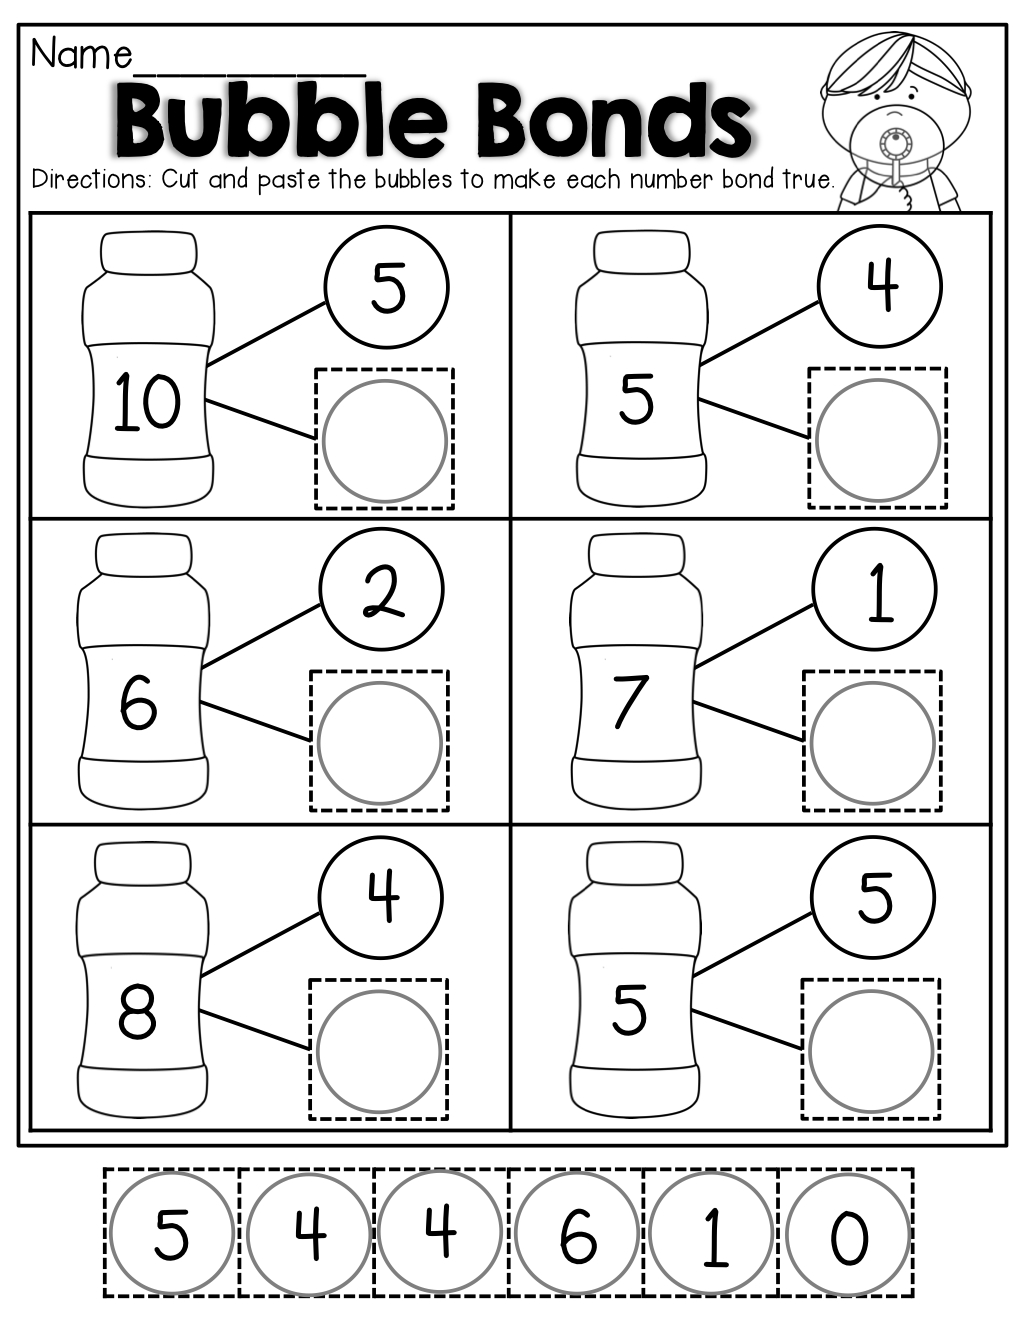 Picture Of The Number 10 Printable Number 10 Numbers Number 10 Printable Numbers Free